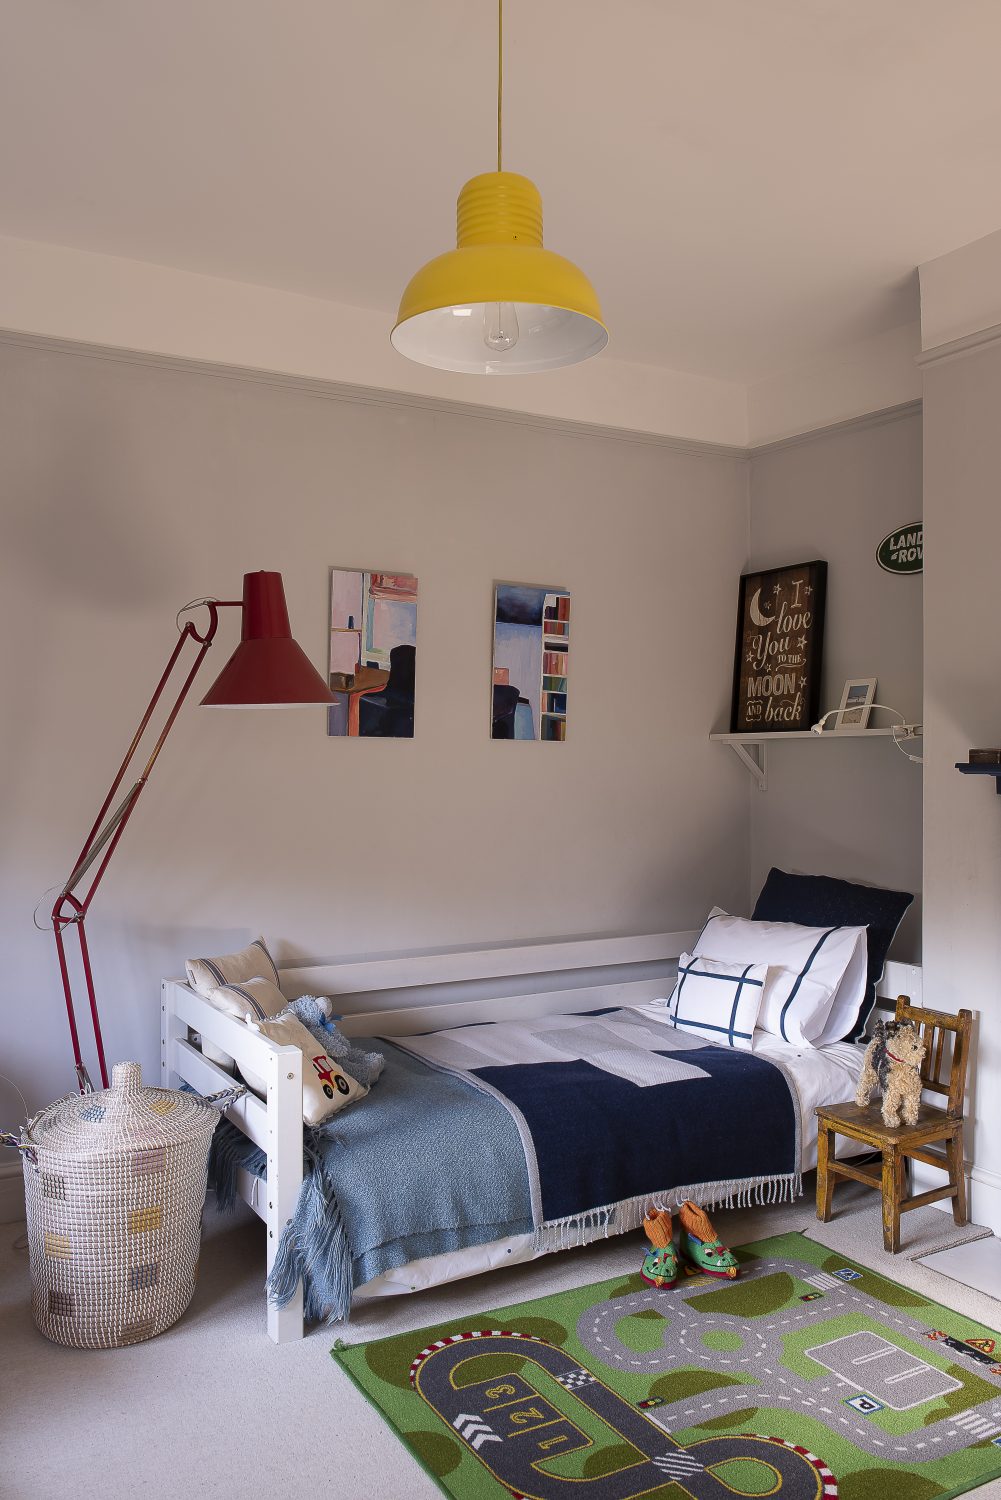 In the couple’s son’s room, Farrow & Ball’s Stiffkey blue used for the fireplace works well with the red Anglepoise and yellow lampshade